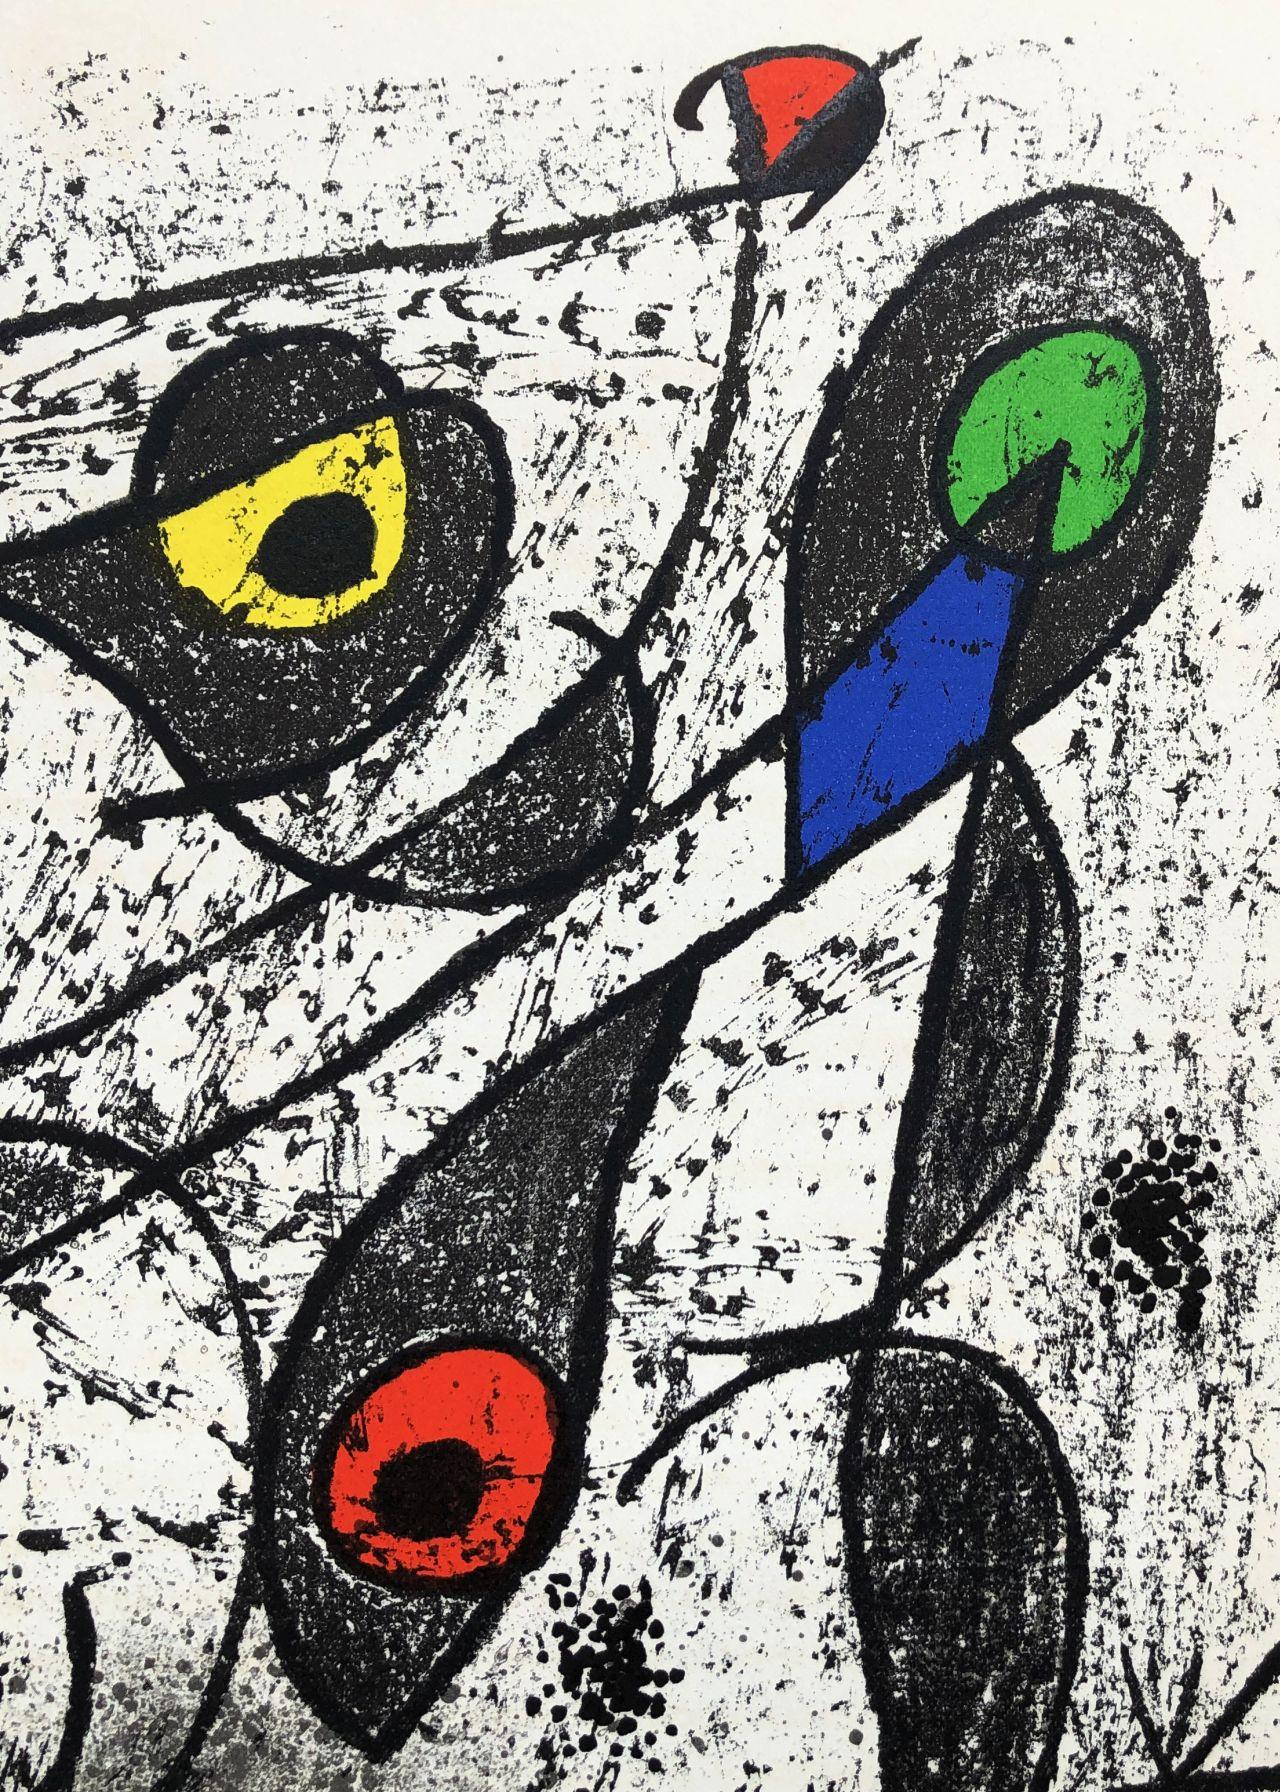 Two Flying Birds - Original Lithograph (Mourlot #838) - Beige Abstract Print by Joan Miró